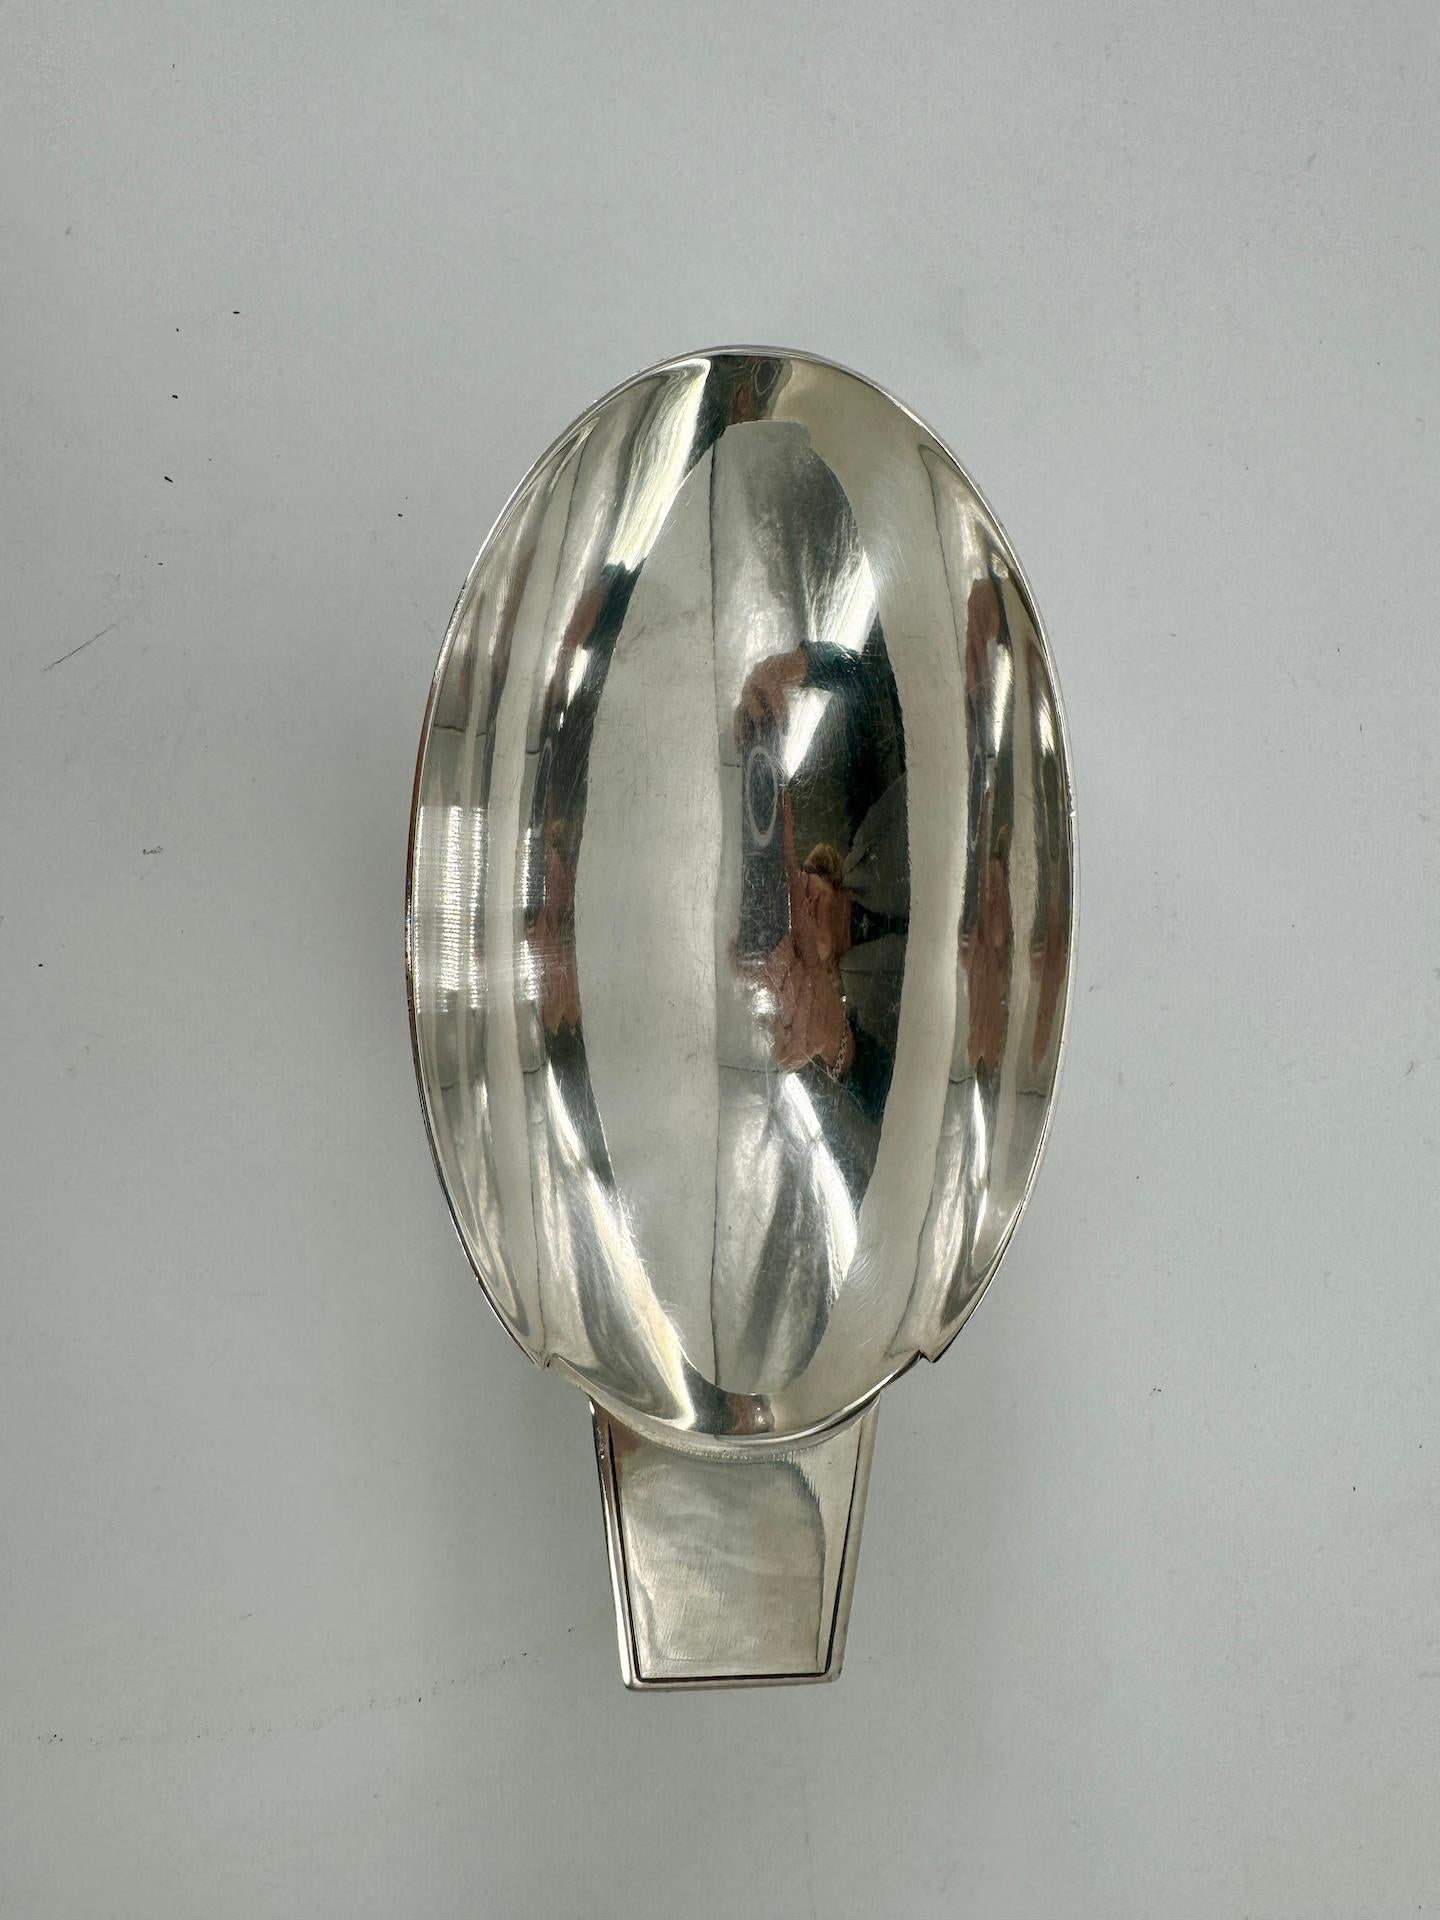 20th Century Gallia For Christofle, Gravy Boat ’Swan’ and its spoon By Christian Fjerdingstad For Sale